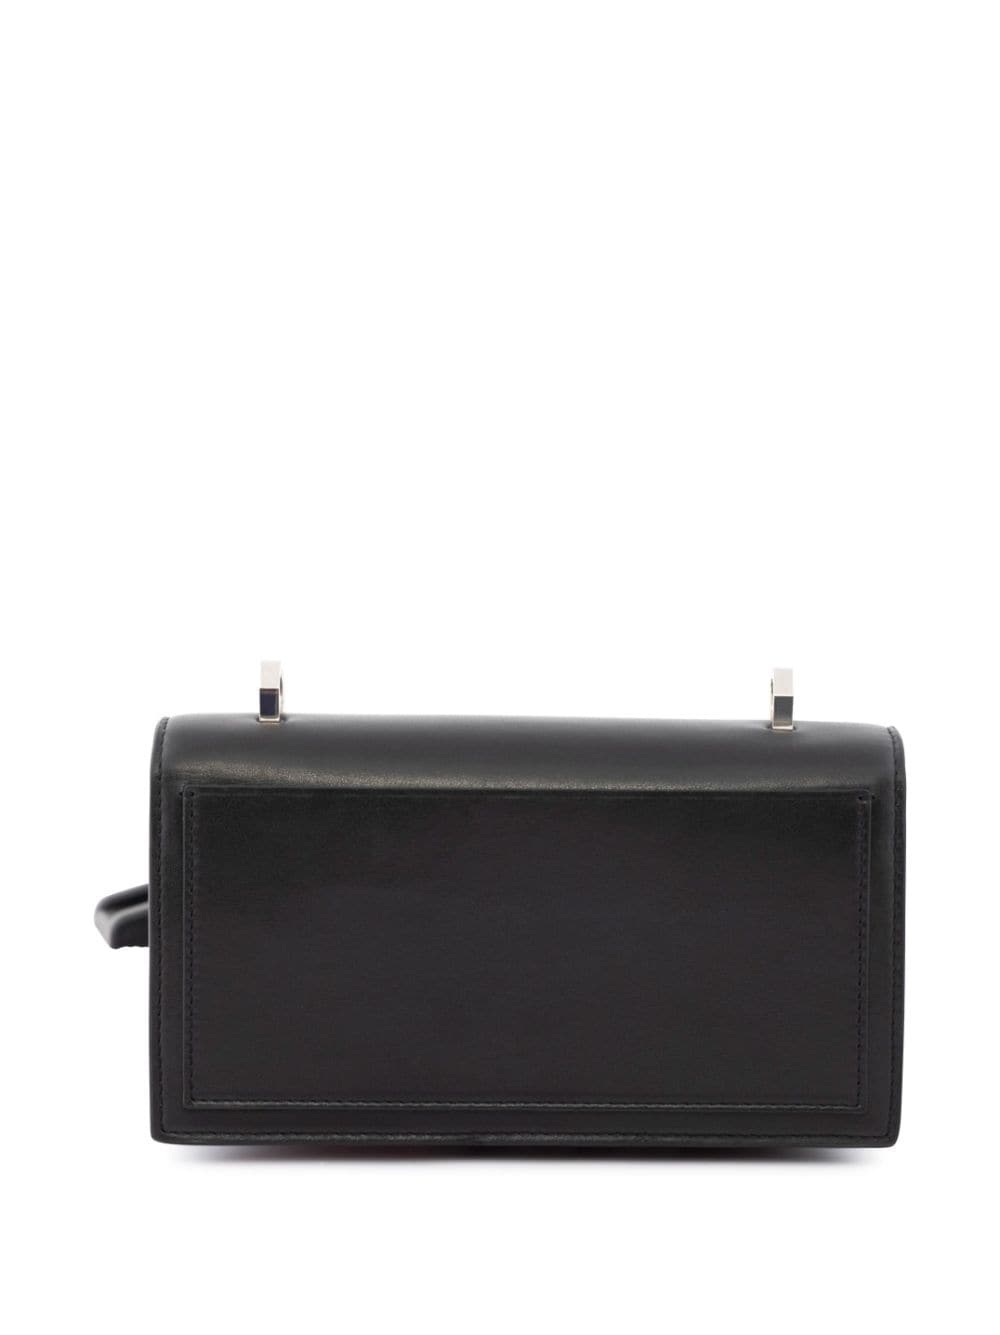 The Knuckle leather satchel - 2